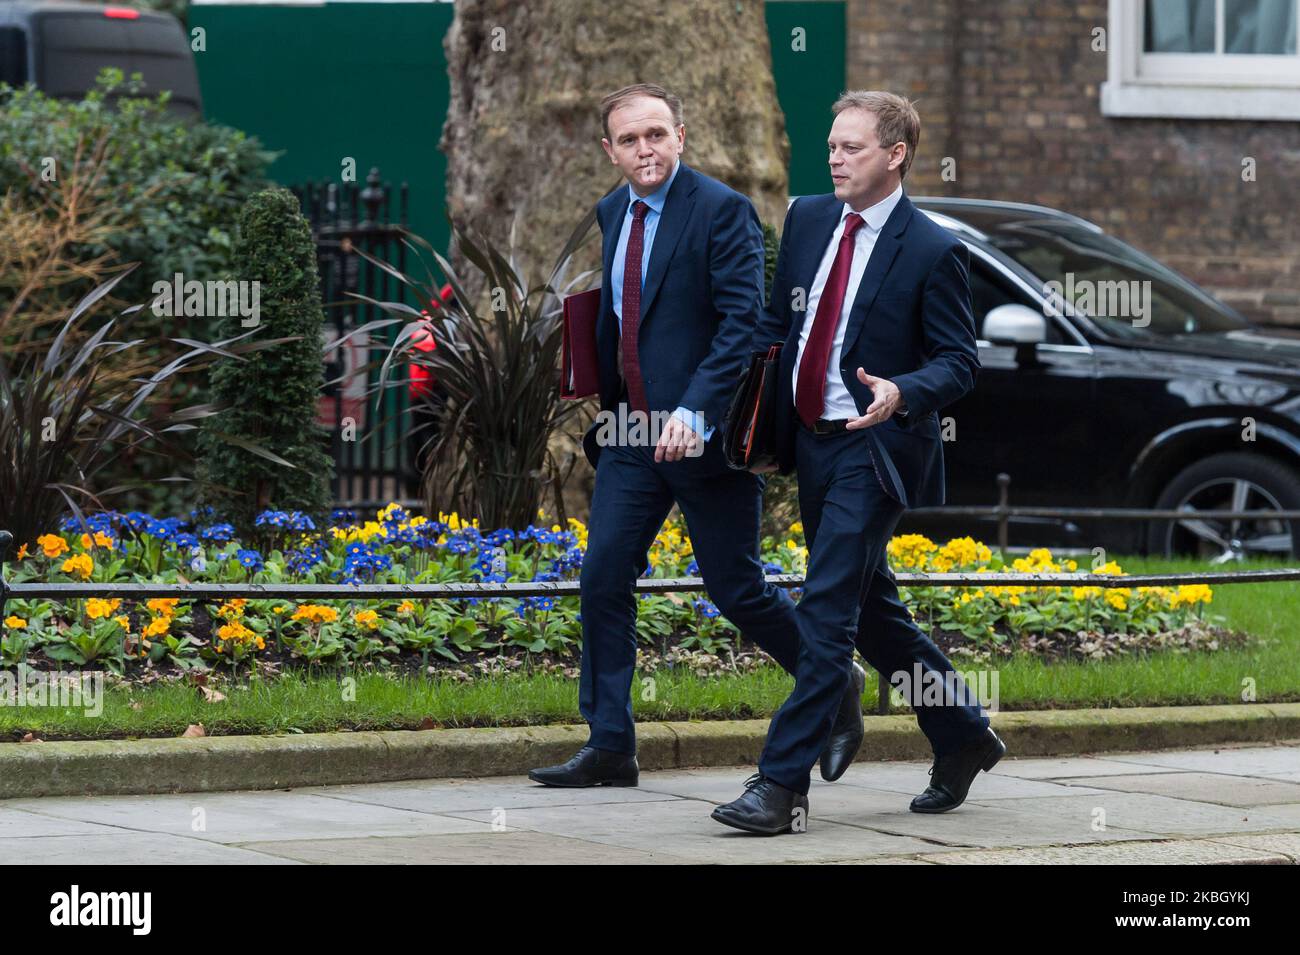 Secretary of State for Environment, Food and Rural Affairs George Eustice (L) and Secretary of State for Transport Grant Shapps (R) arrive in Downing Street in central London to attend a first cabinet meeting after reshuffle on 14 February, 2020 in London, England. Yesterday, Prime Minister Boris Johnson conducted a reshuffle of his government following Britain's departure from the EU. (Photo by WIktor Szymanowicz/NurPhoto) Stock Photo